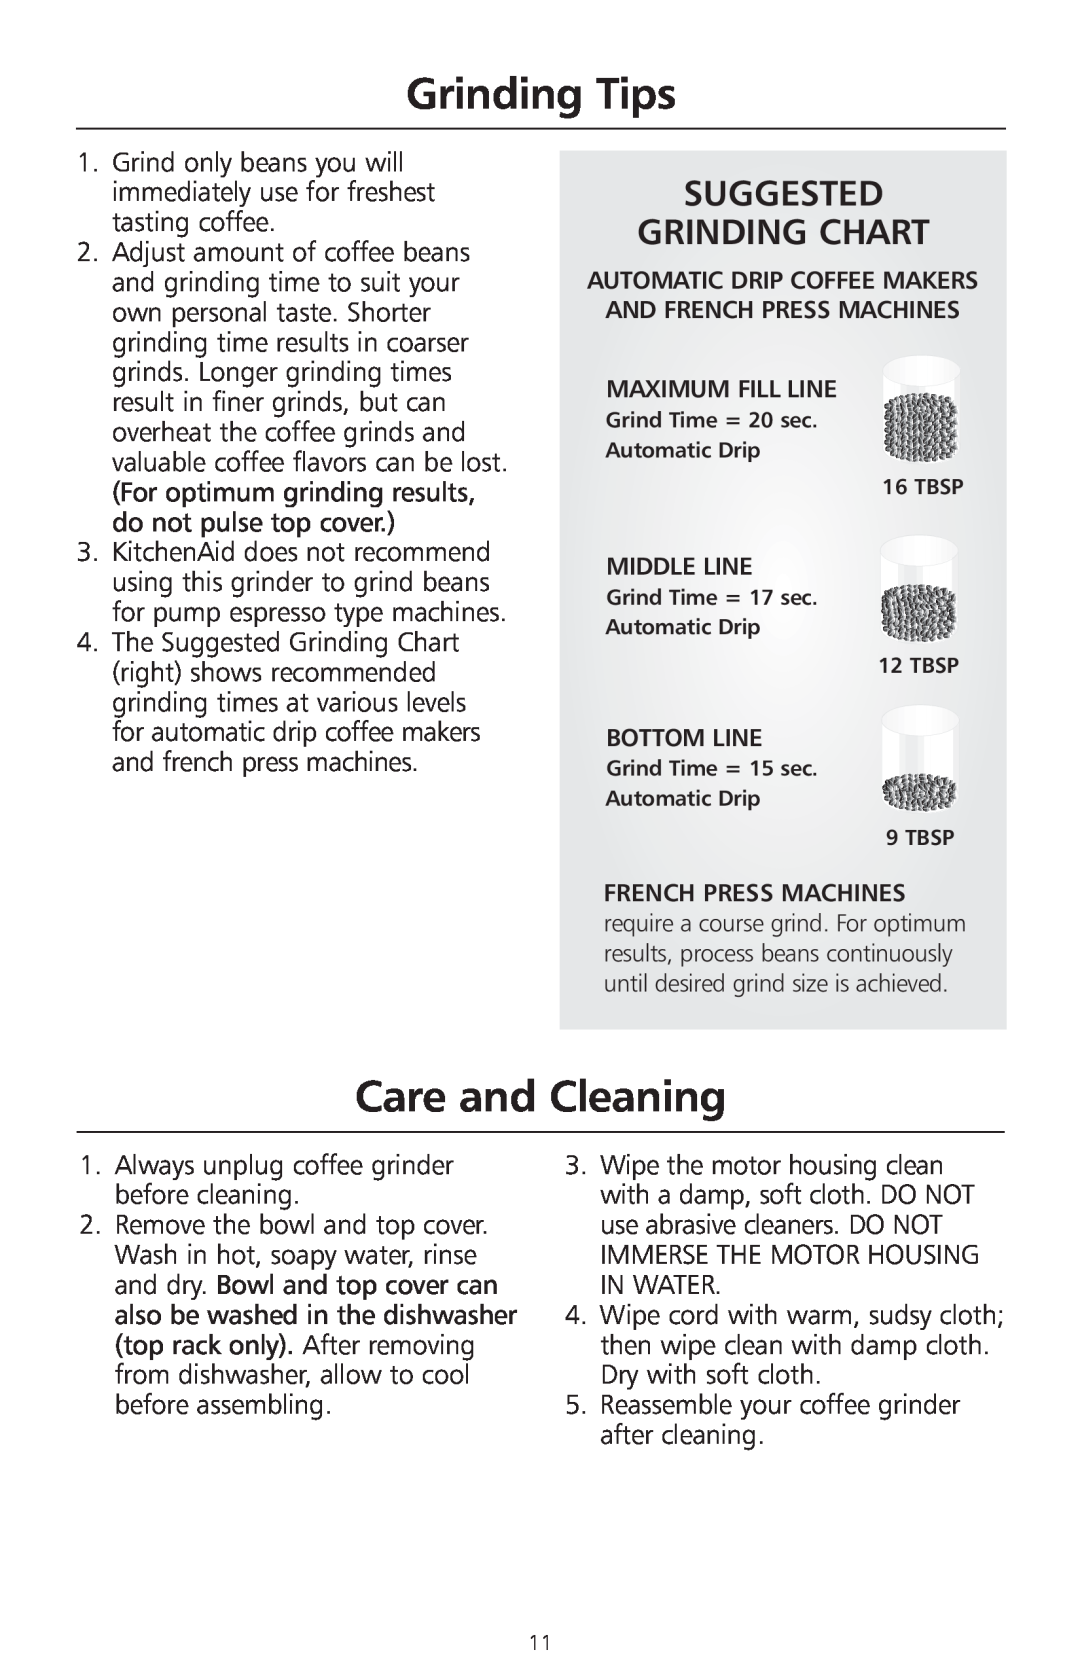 KitchenAid 2633 manual Grinding Tips, Care and Cleaning, Suggested Grinding Chart 